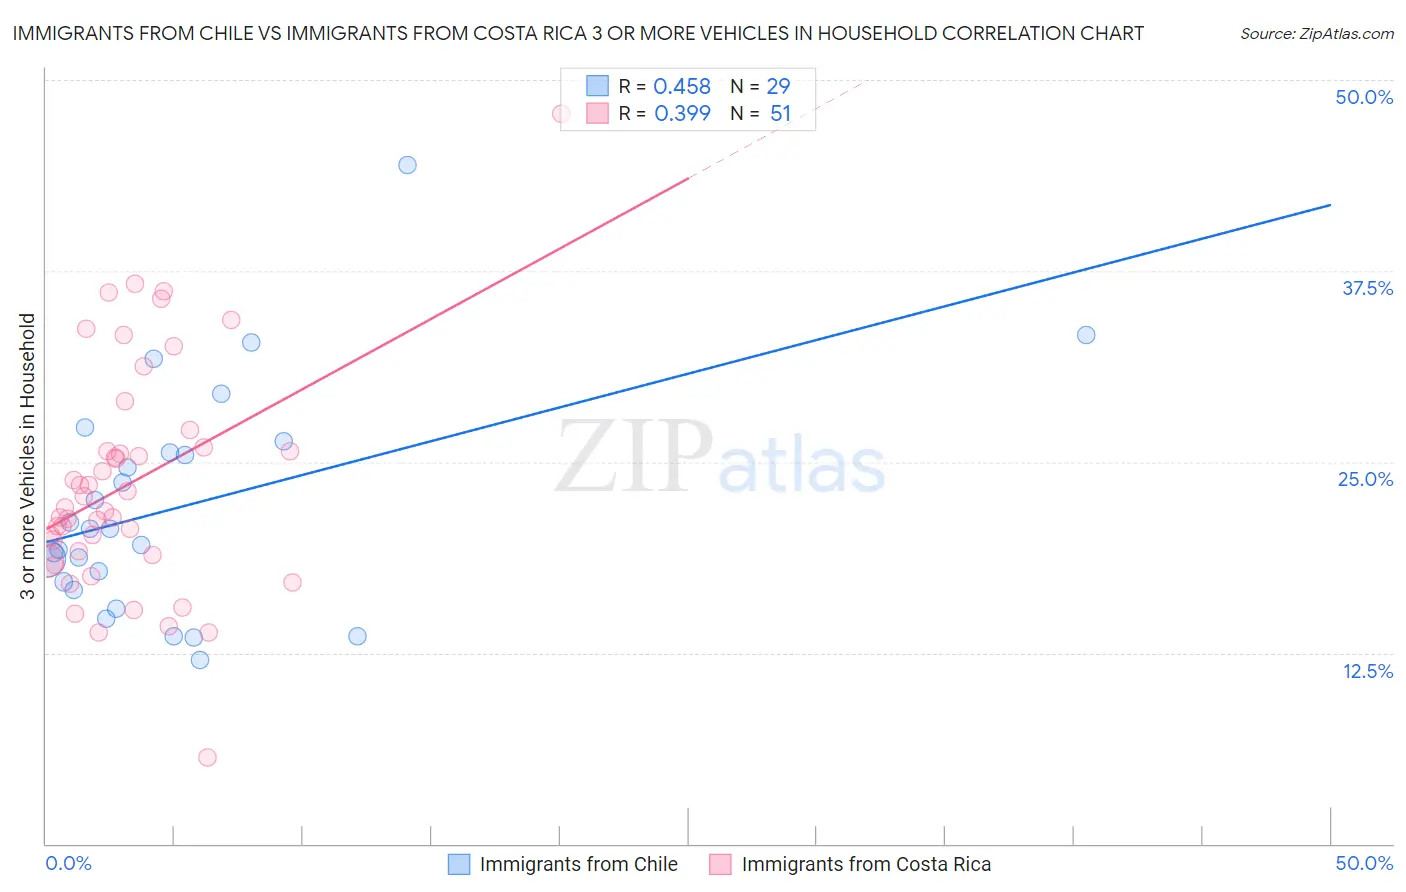 Immigrants from Chile vs Immigrants from Costa Rica 3 or more Vehicles in Household